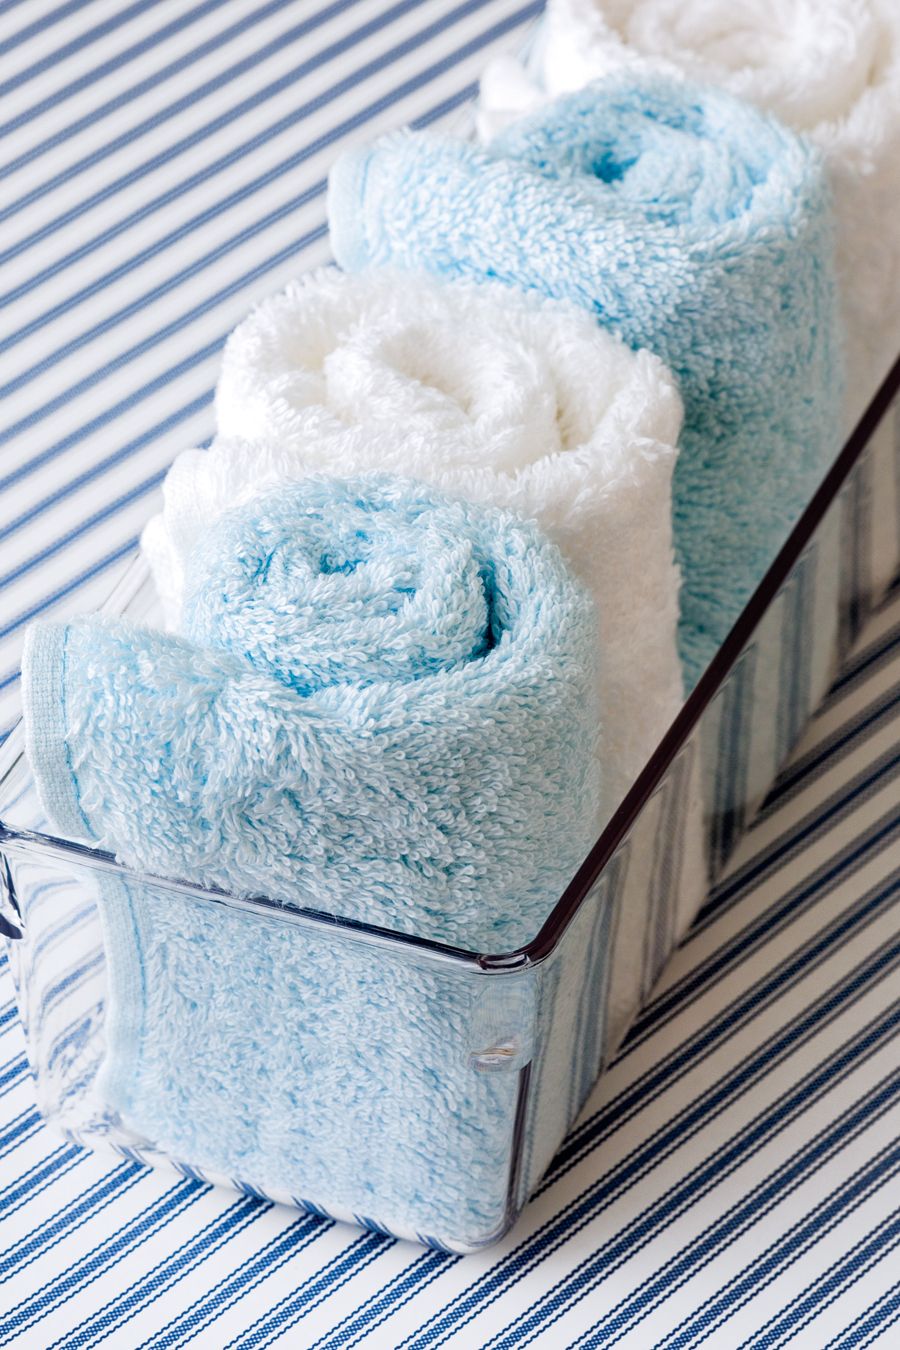 Small Kitchen Towels Rolled Up Bath Towels Stock Image - Image of